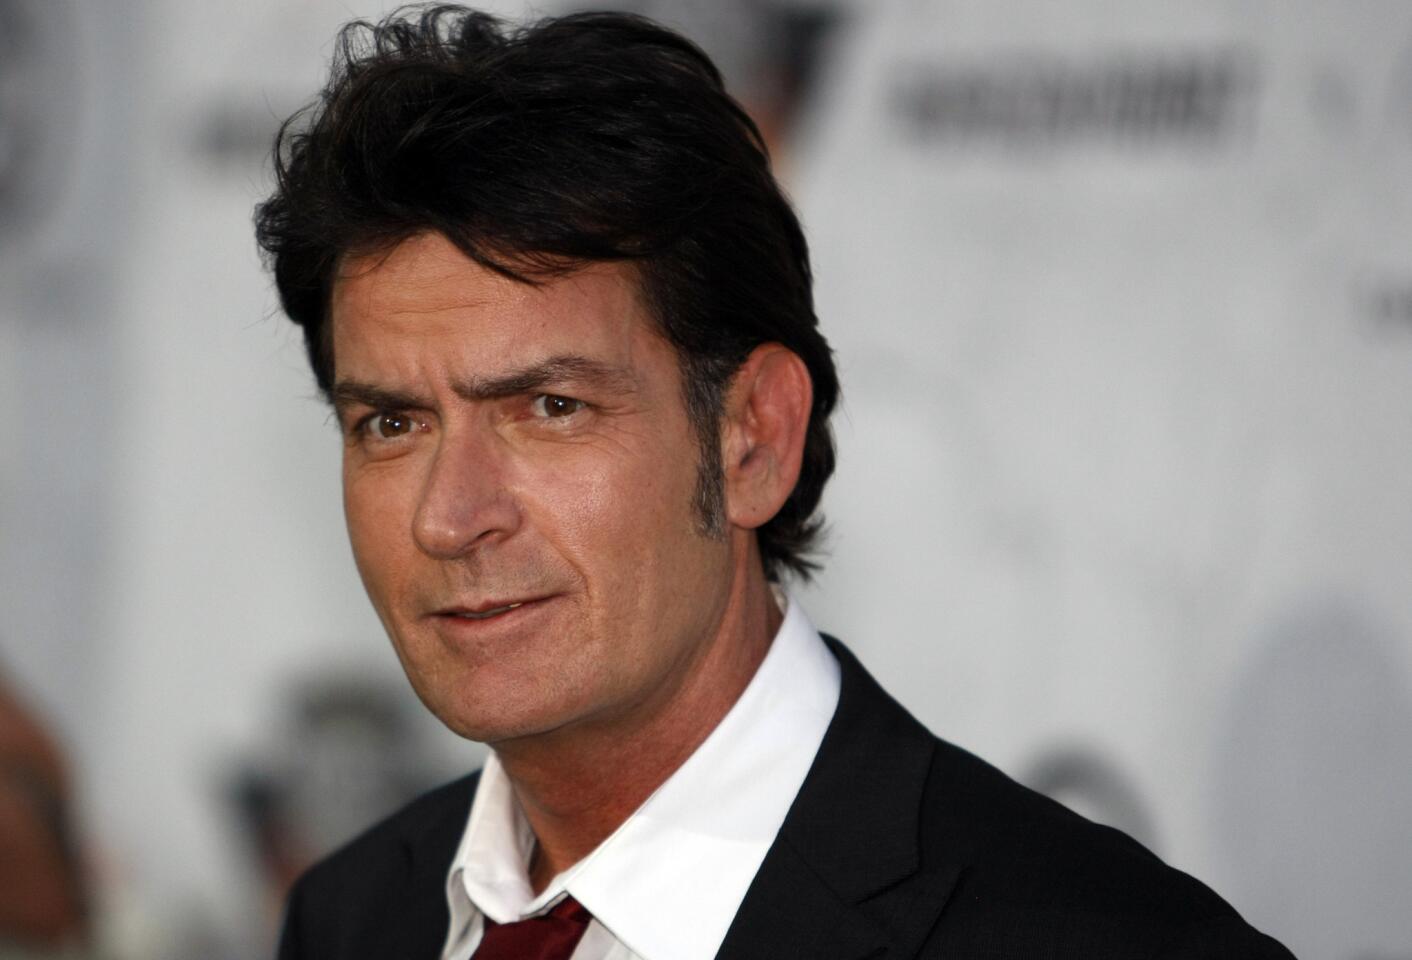 Charlie Sheen gives it to Rihanna on Twitter